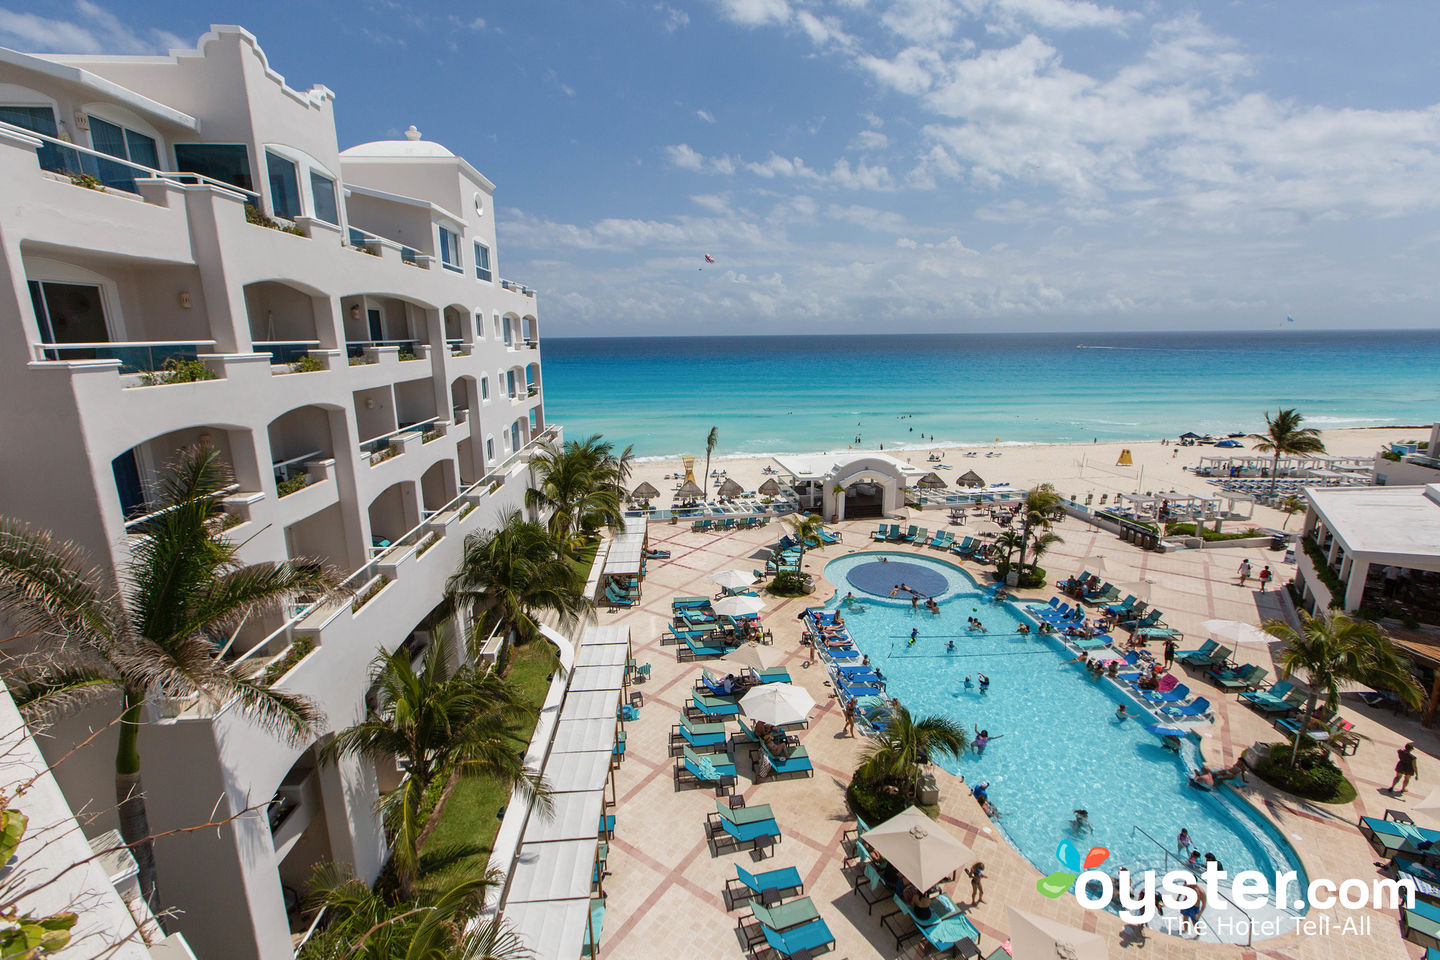 Panama Jack Resorts Cancun Review What To Really Expect If You Stay